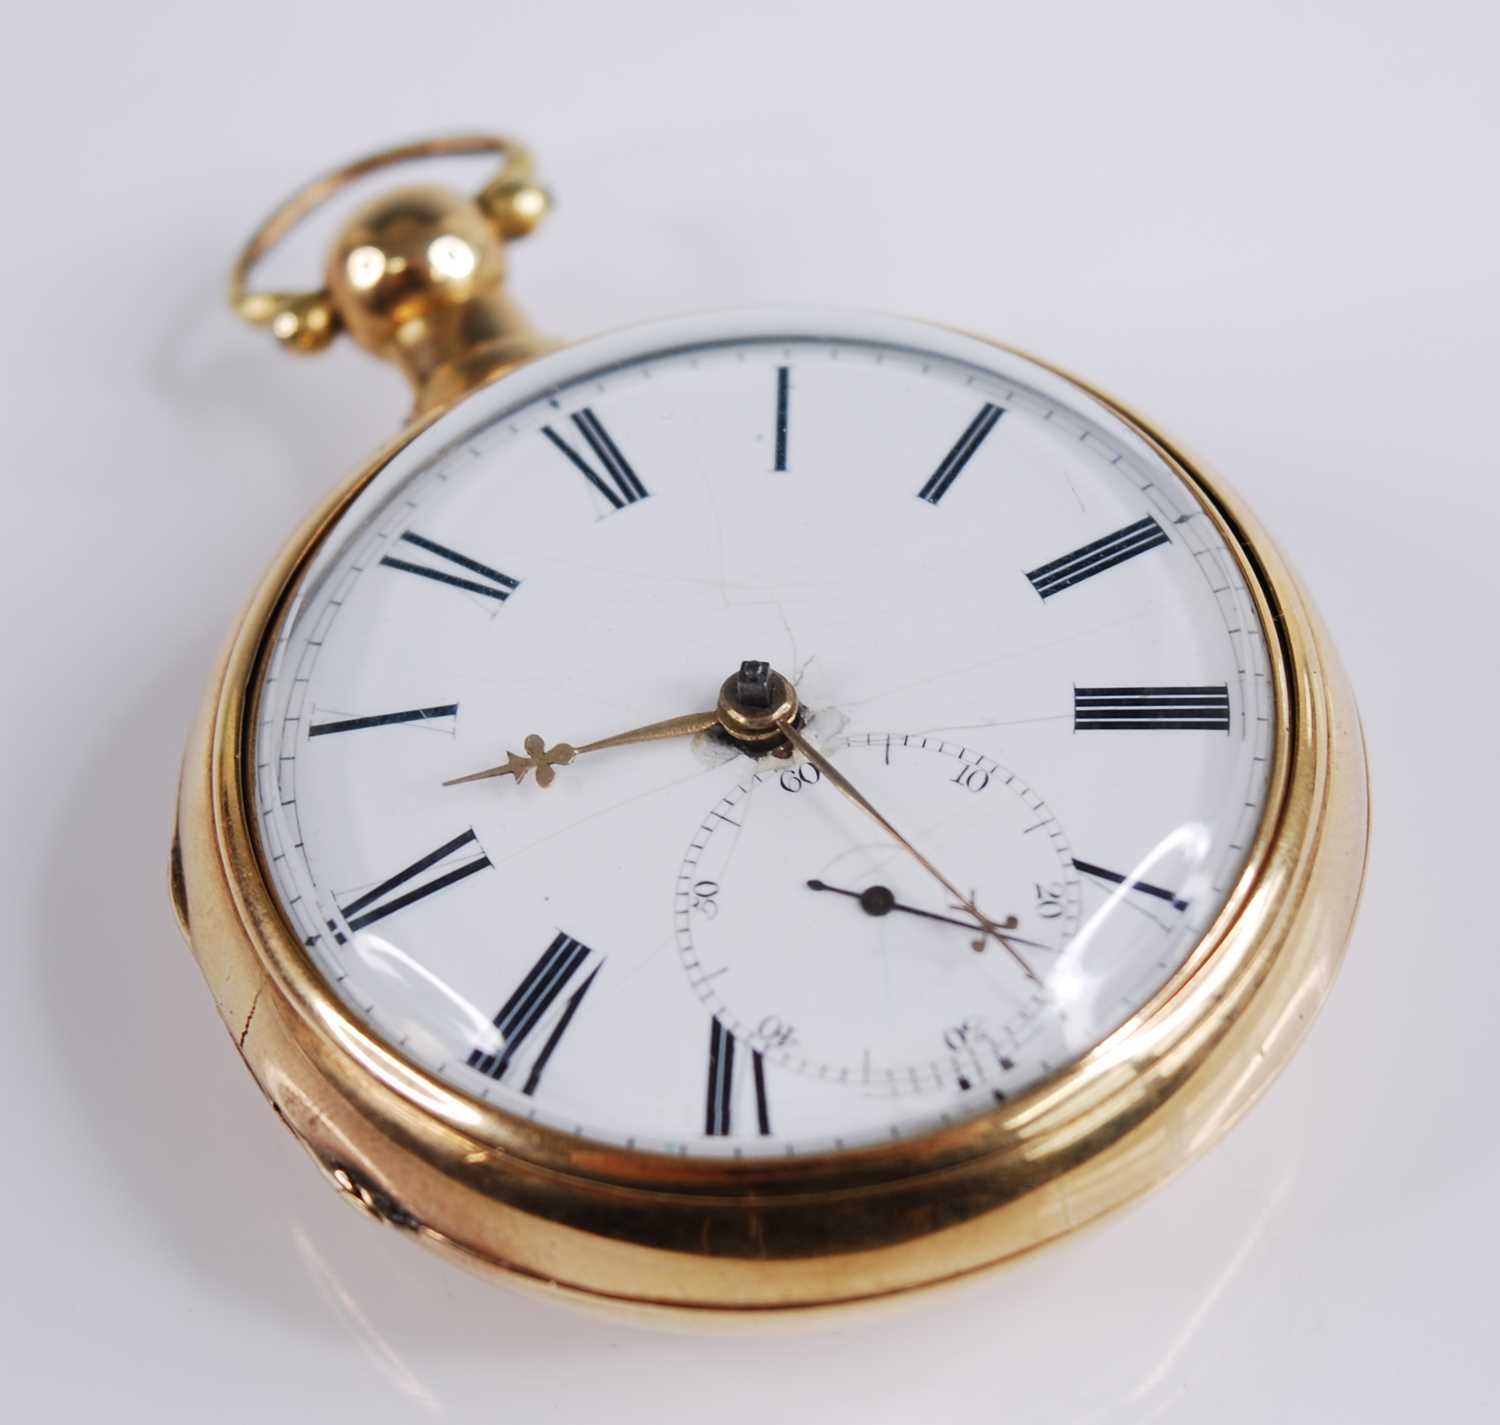 George Orpwood - an early Victorian gent's 18ct gold pair cased pocket watch, having a white